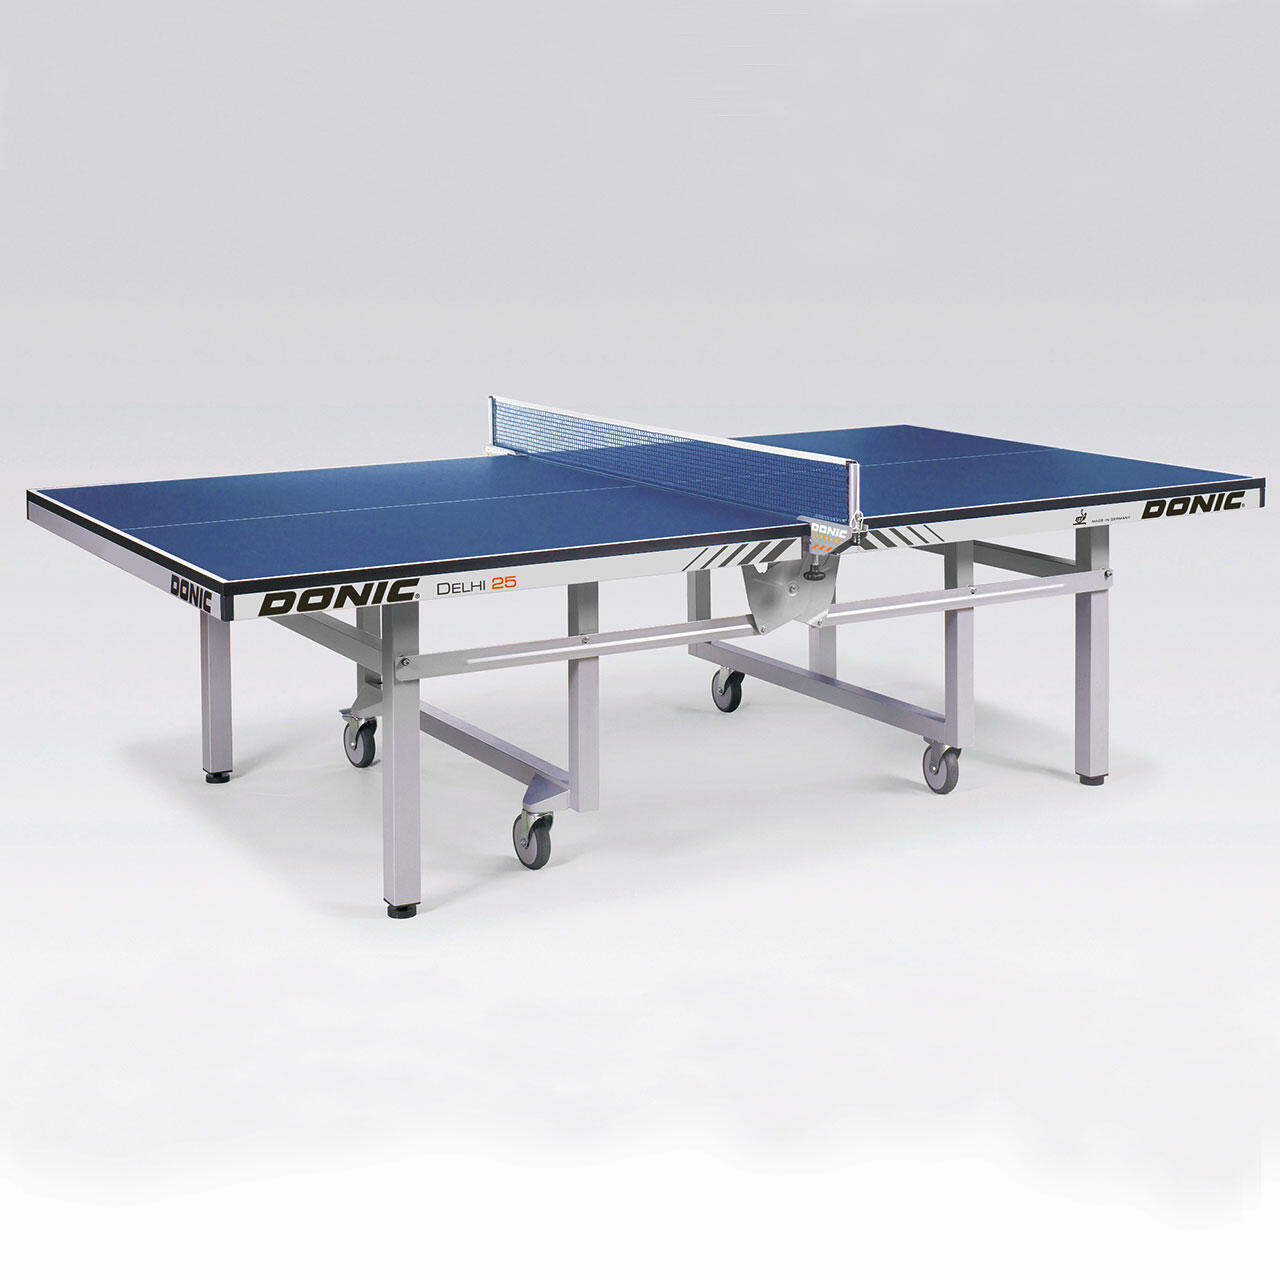 Donic Delhi 25 ITTF Approved Blue Table Tennis Table 3/3